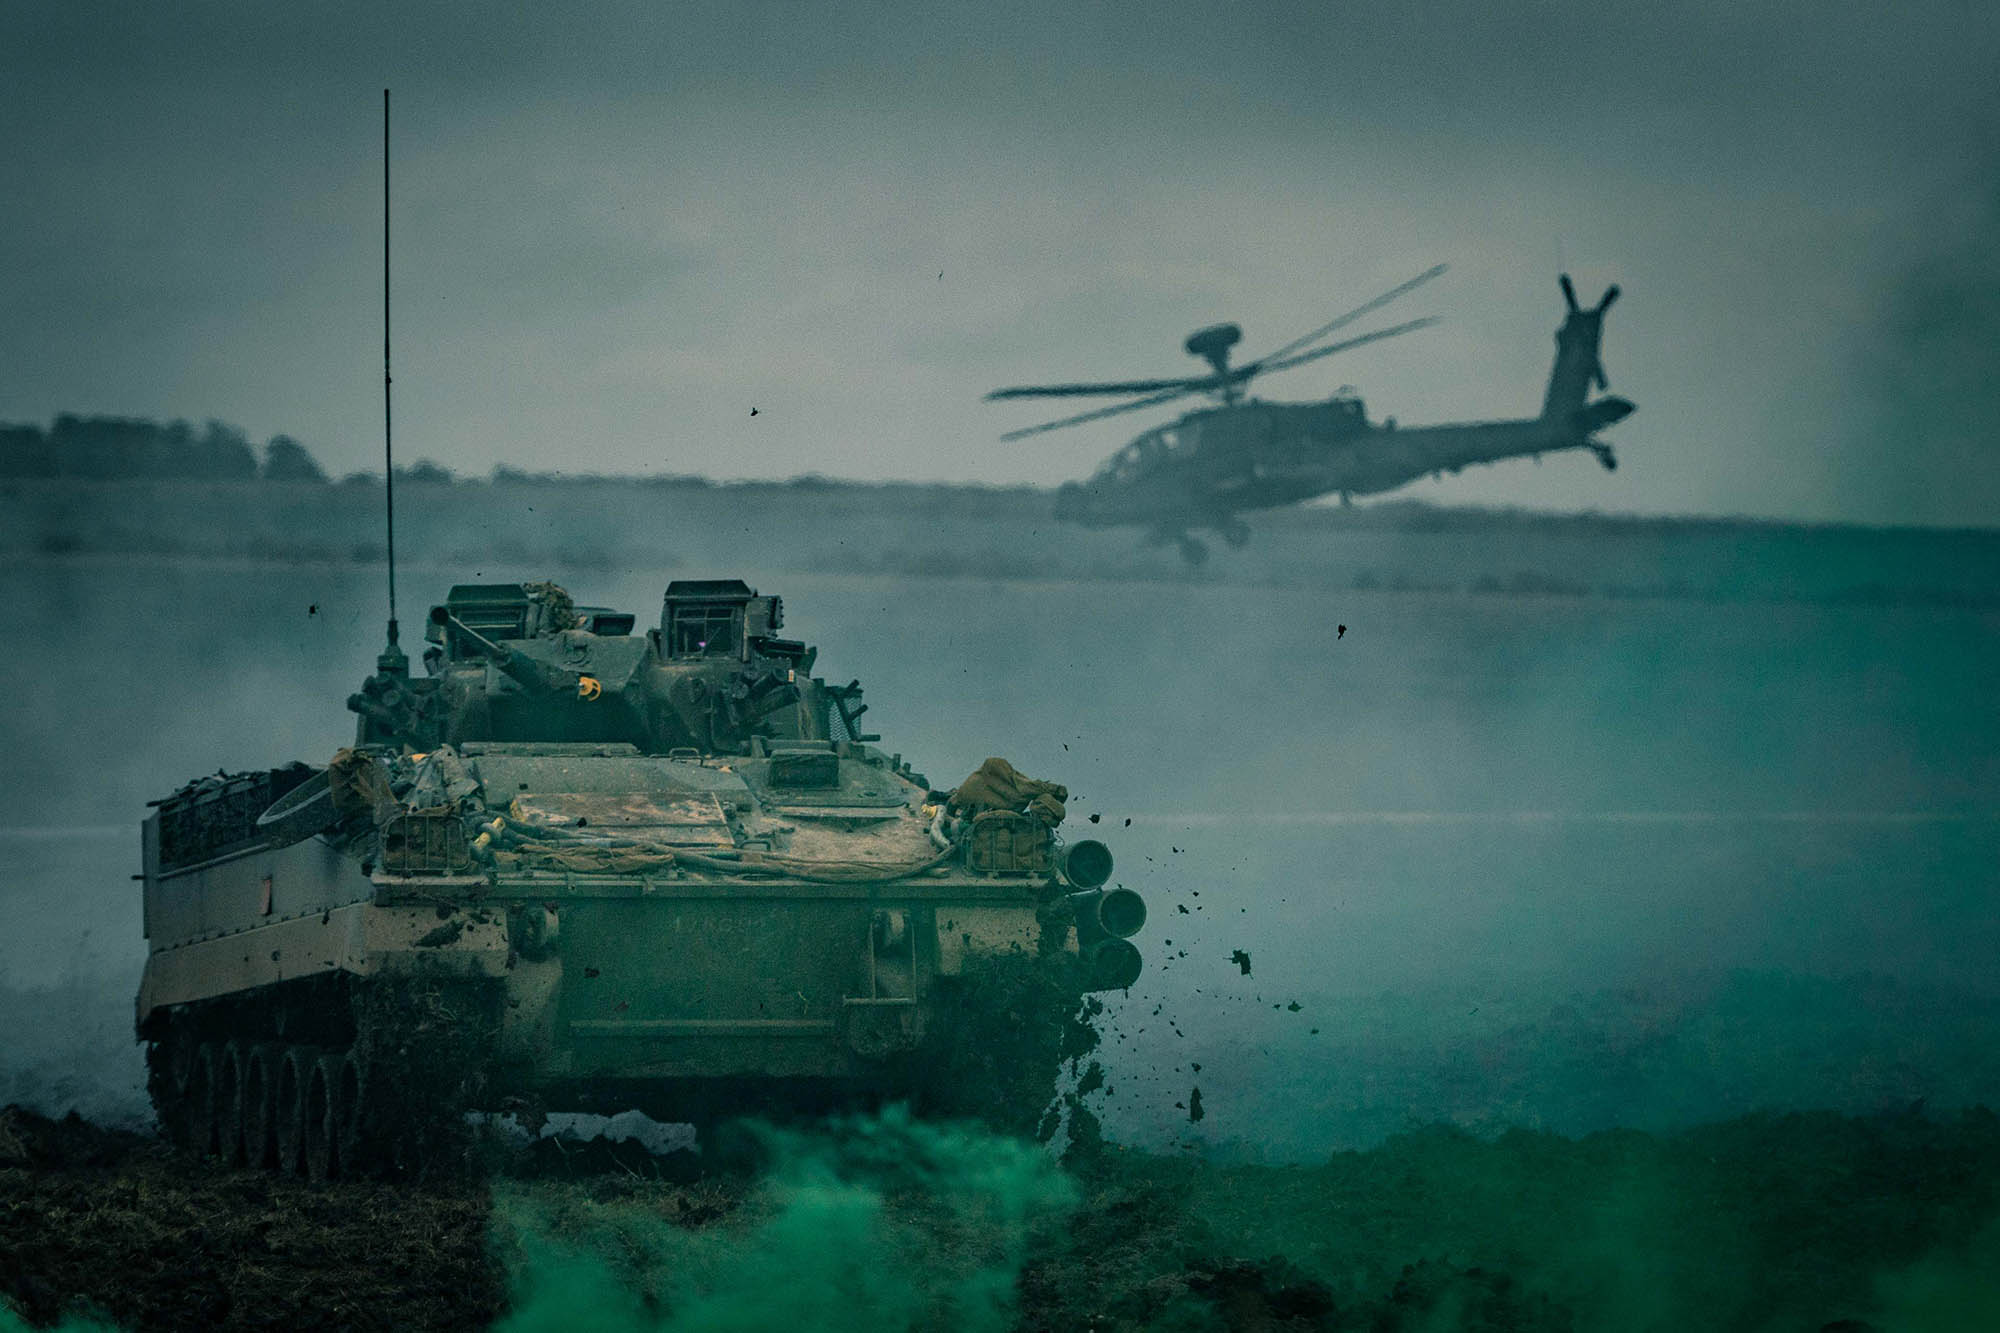 A tank driving in a muddy environment and a helicopter flying behind it